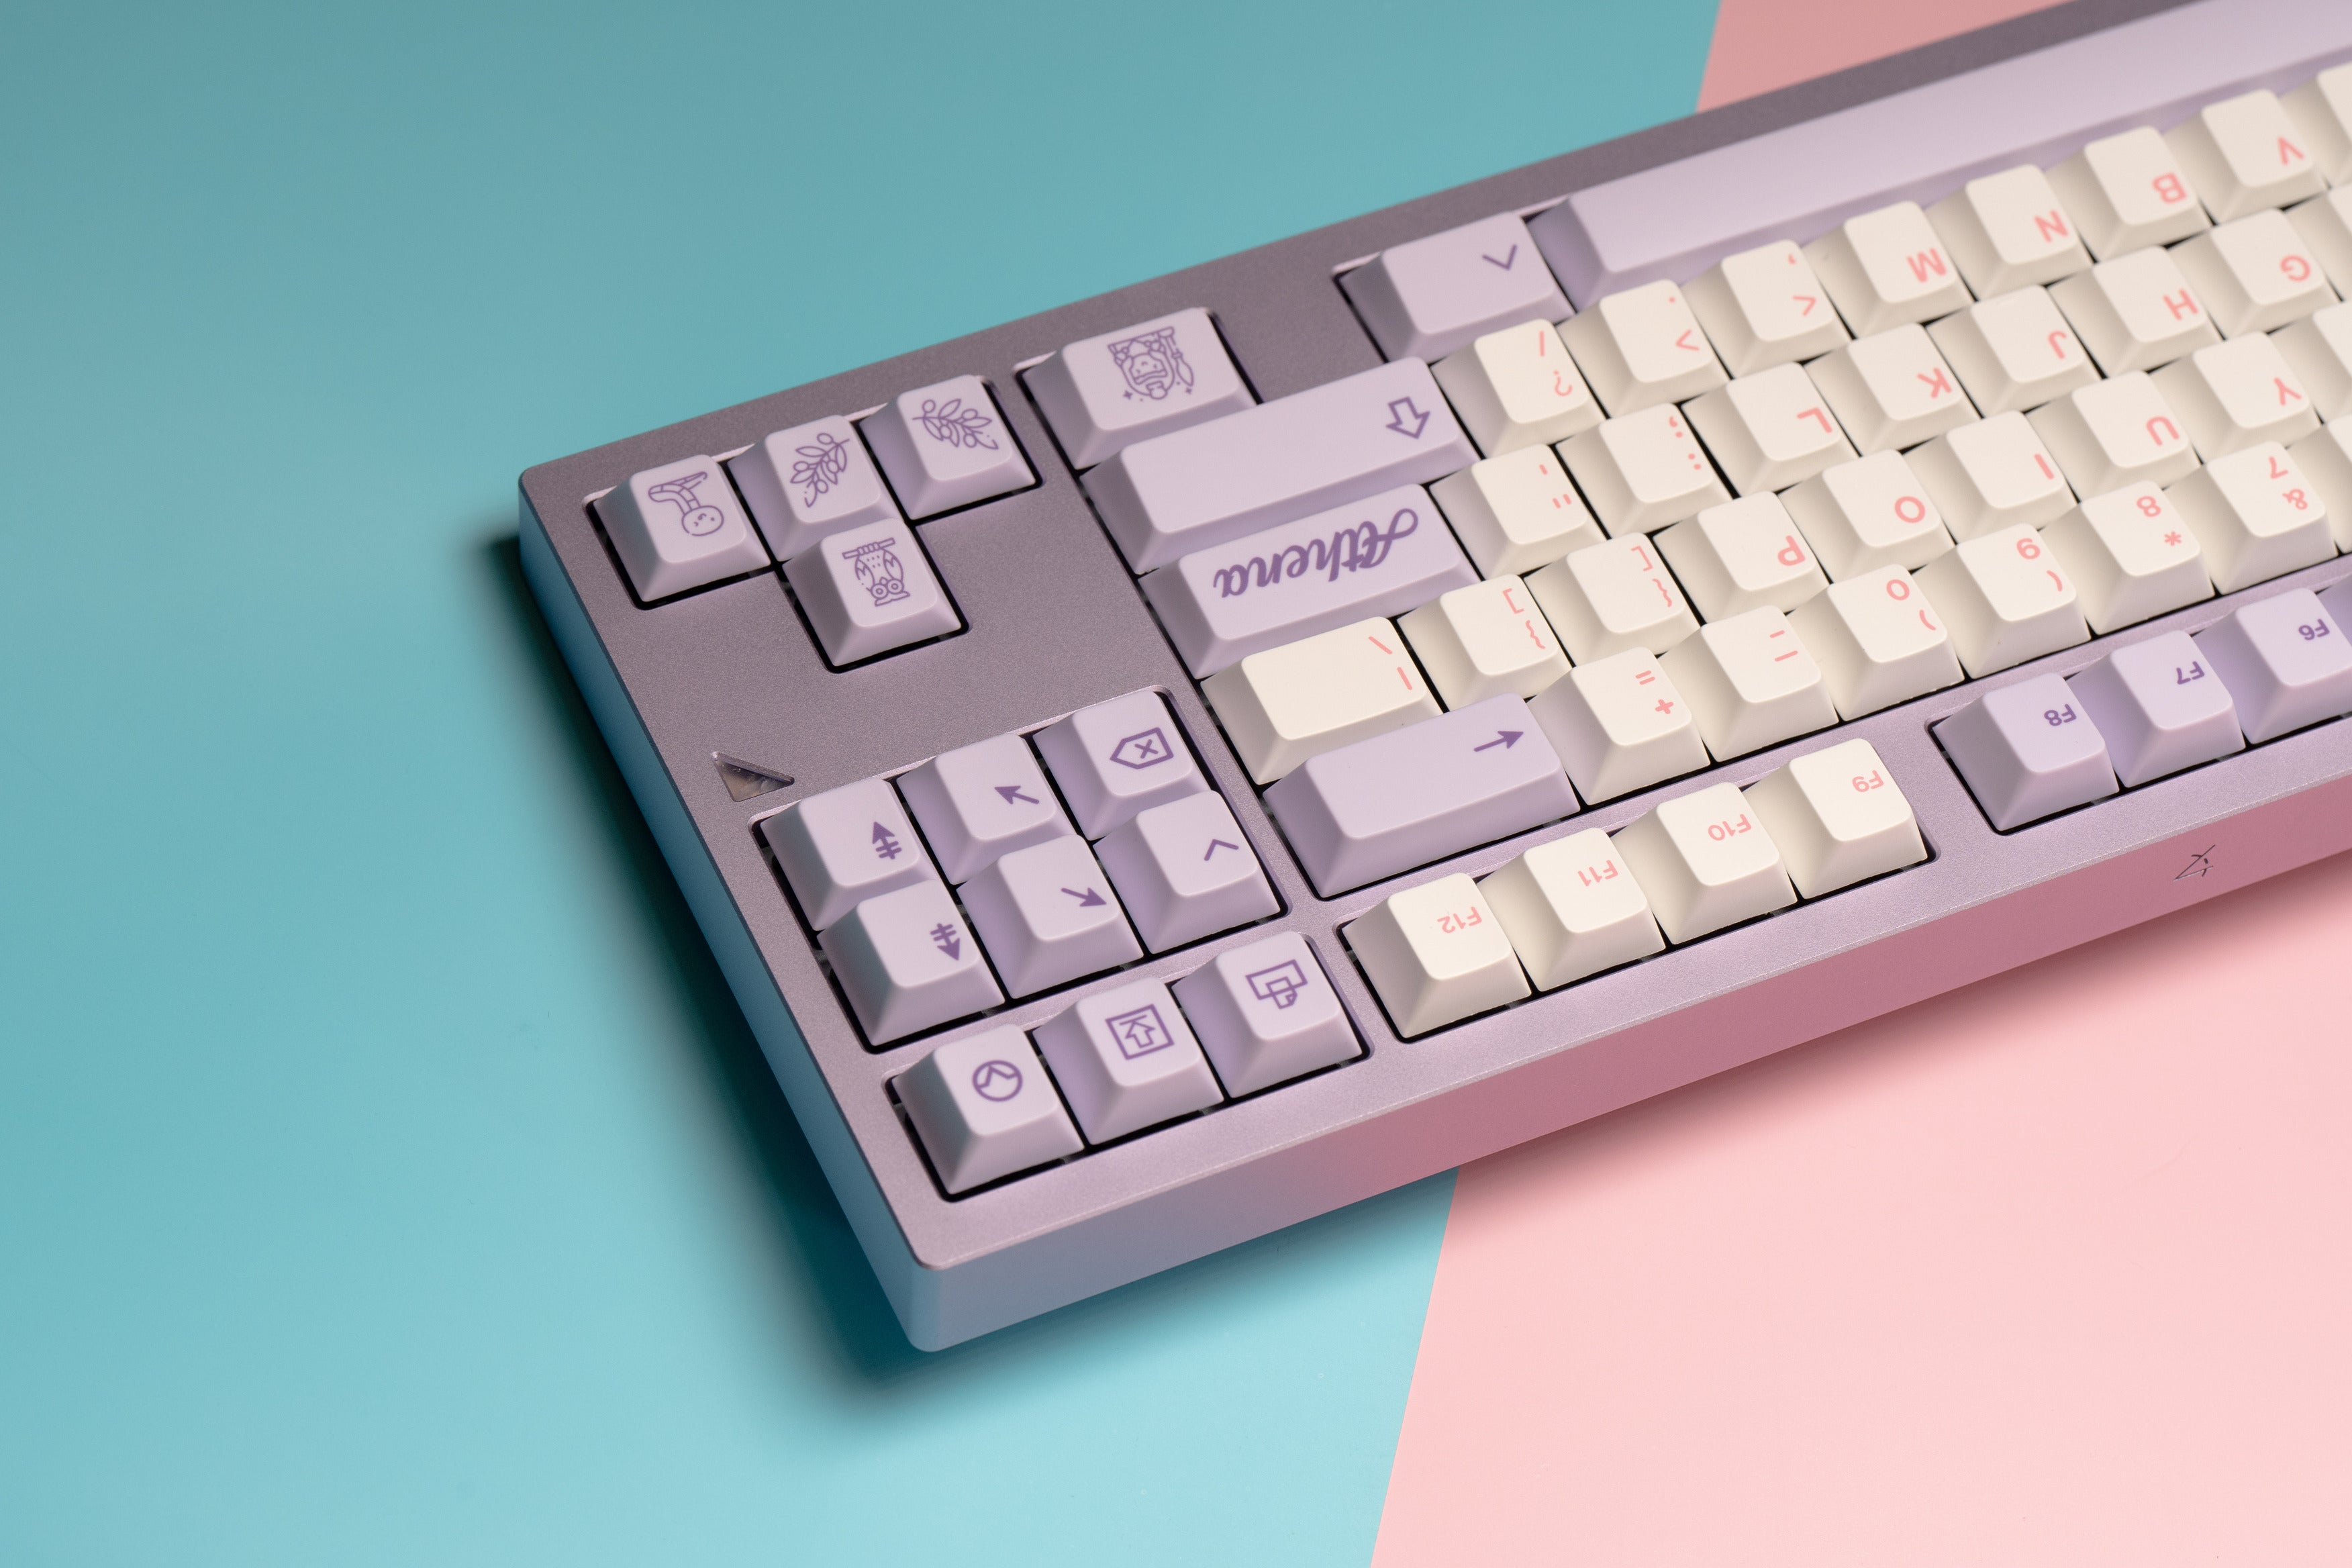 [In Stock] Athena PBT Cherry Keycaps Set (Free Shipping To Some Countries)